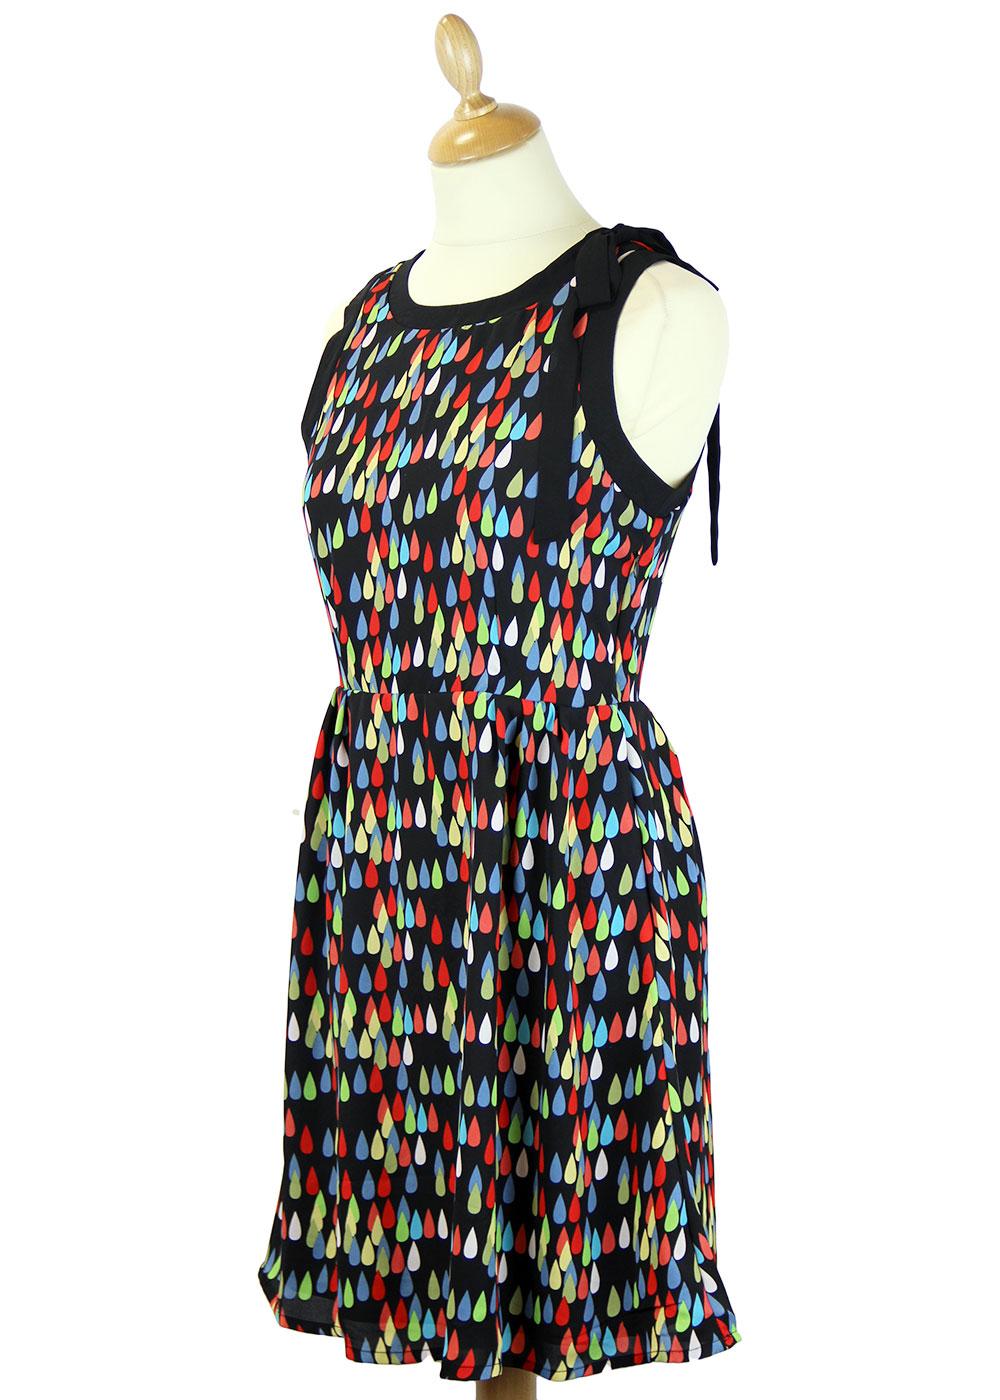 TULLE Retro 60s Psychedelic Raindrop Dress with Flared Skirt